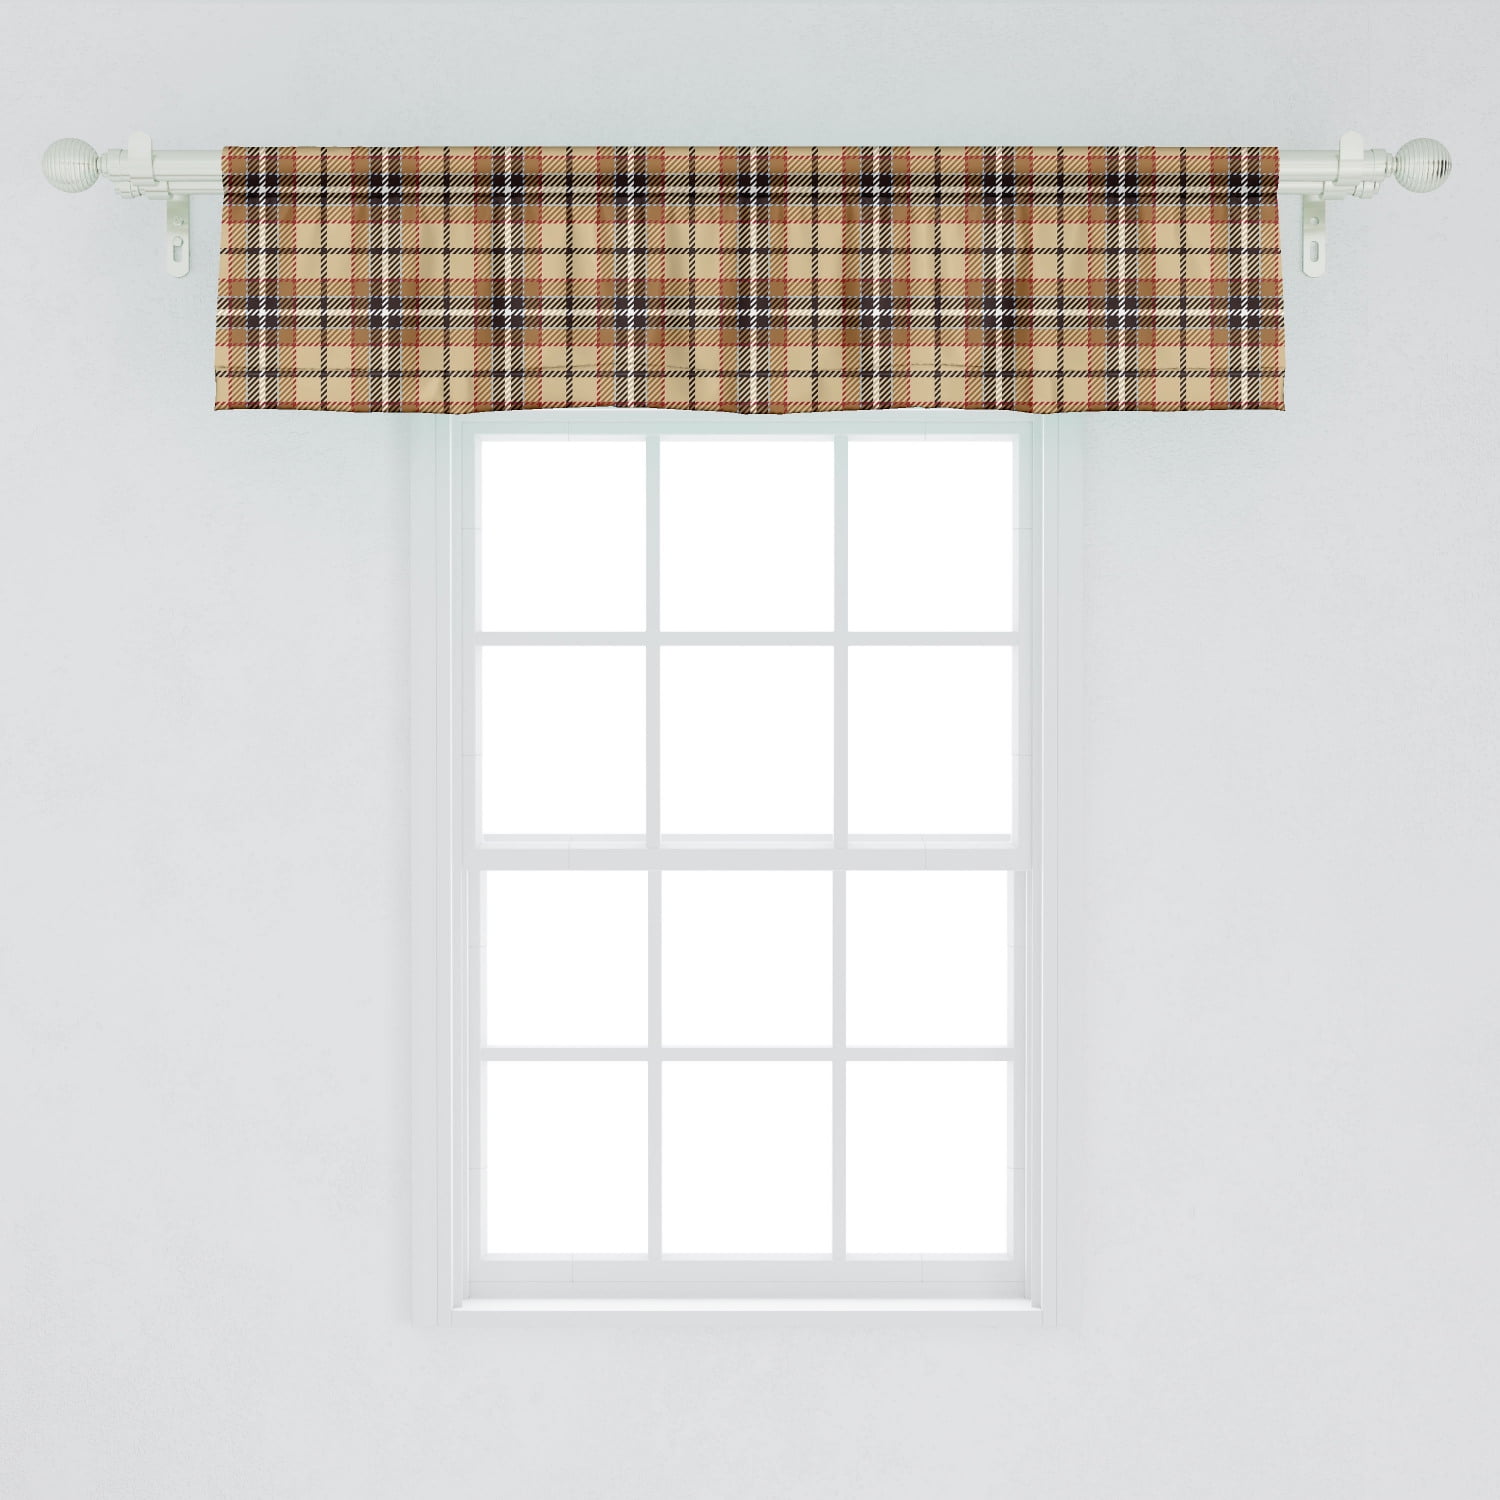 Living Room Bedroom Window Drapes 2 Panel Set 108 X 84 Ambesonne Tuscan Curtains Brown Green Italian Street in a Small Provincial Town of Tuscan Italy European